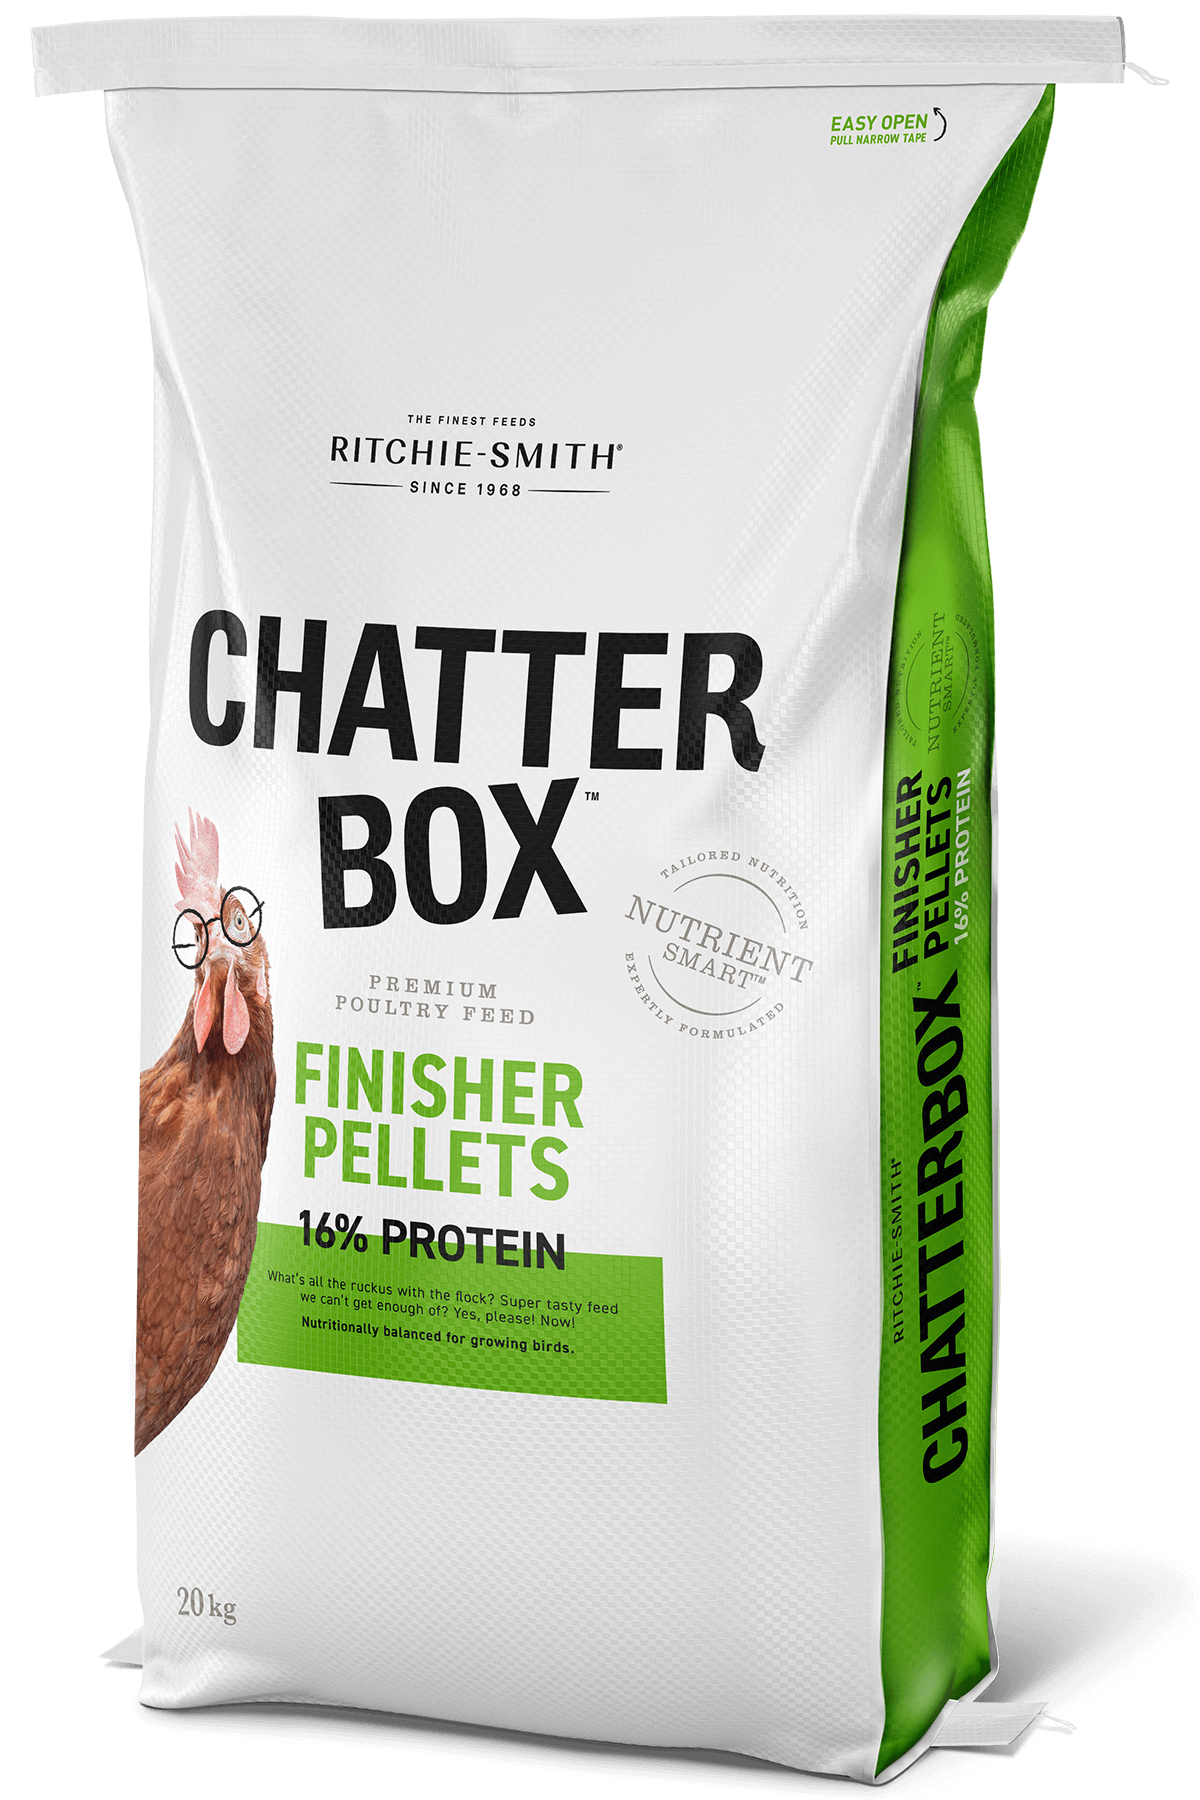 Finisher Pellets by Chatterbox Premium Poultry Feed